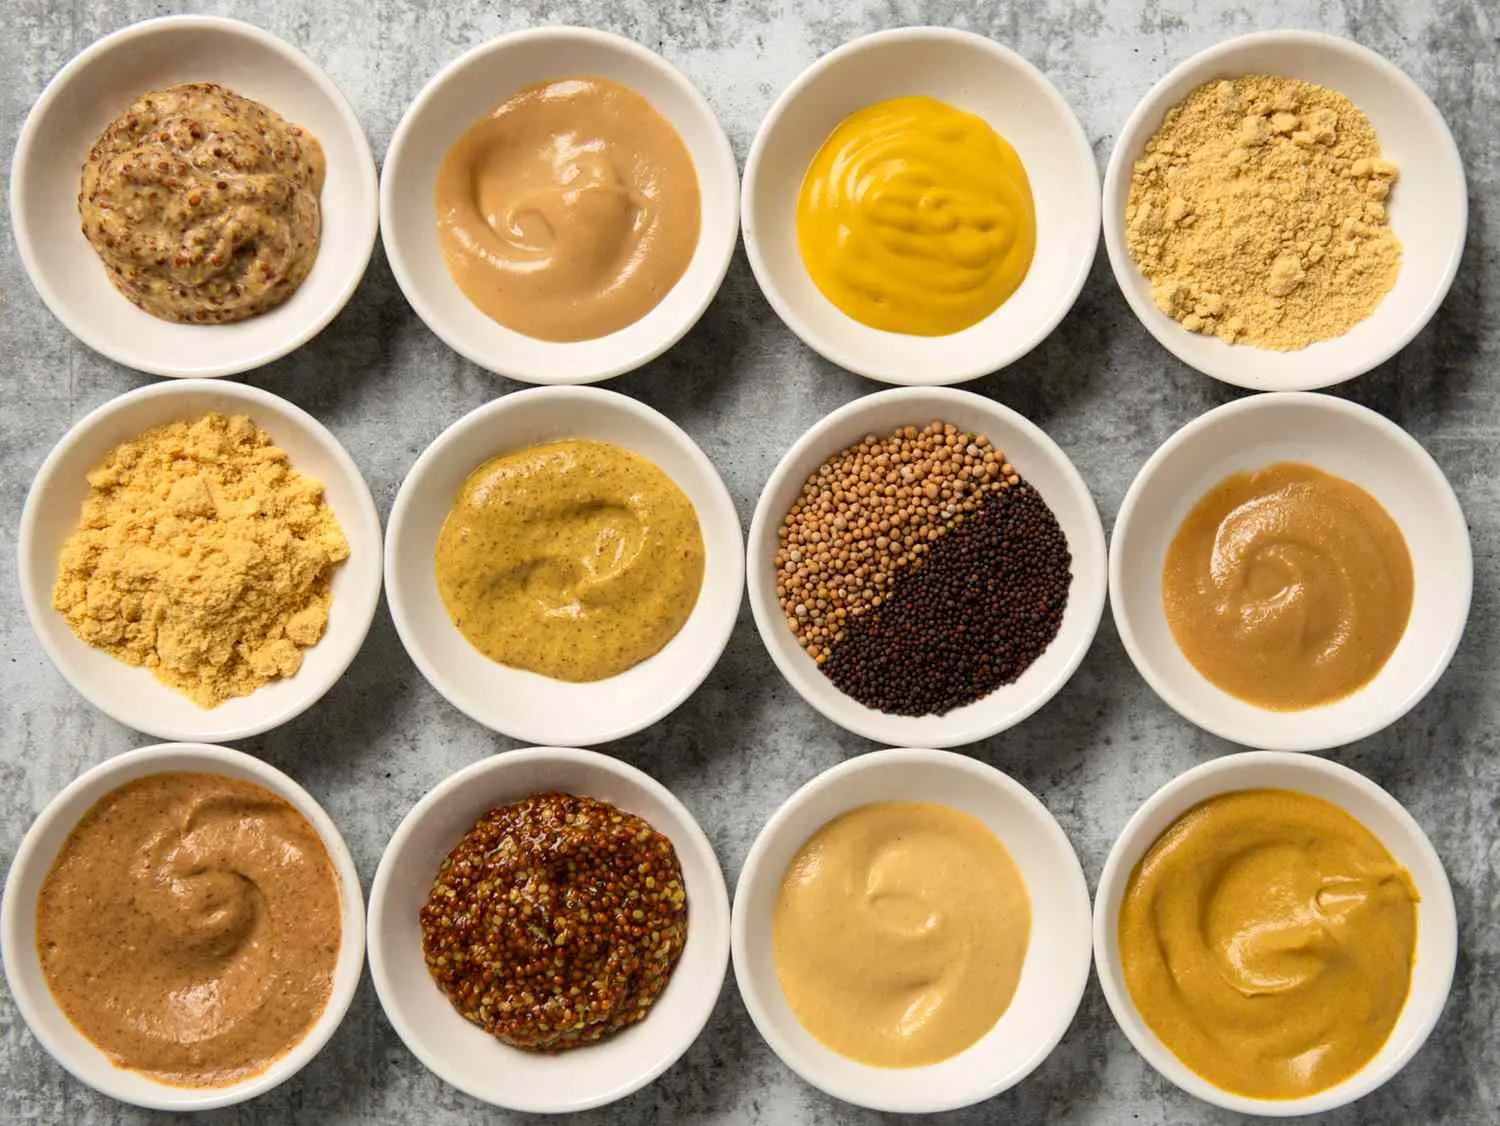 smoked mustard - Is mustard hot or spicy